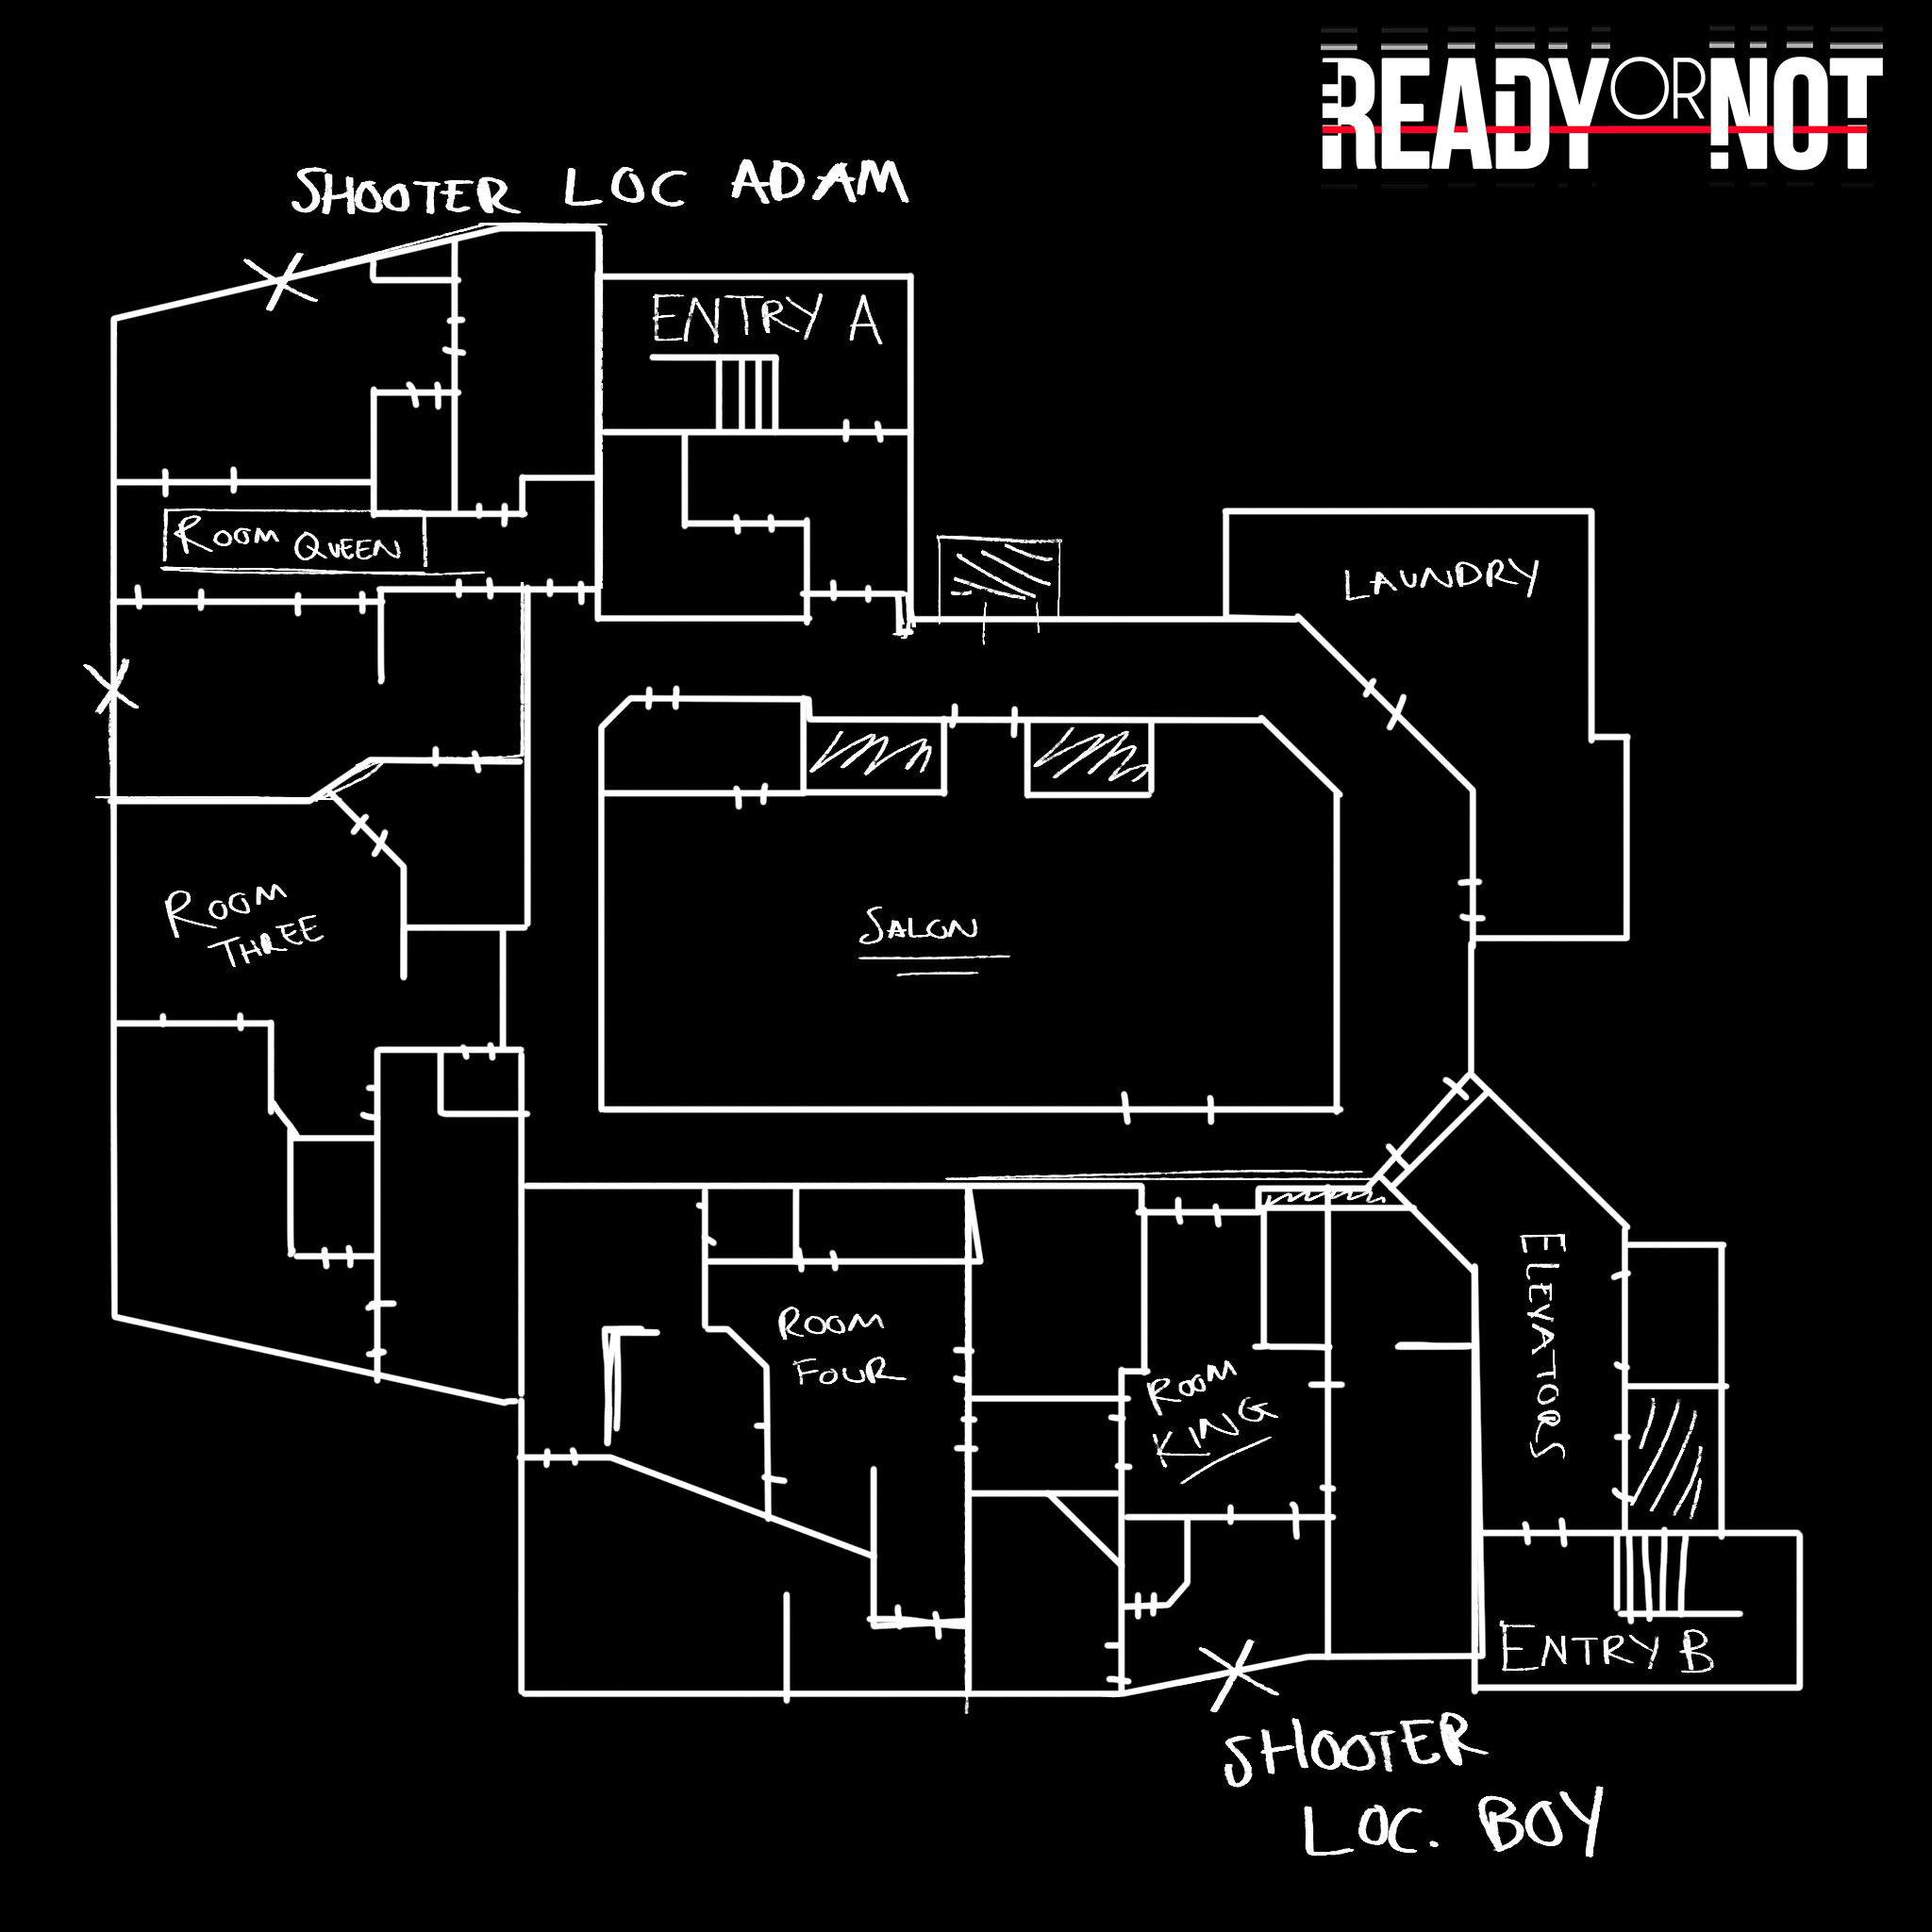 Read Or Not | Map Blueprints image 21